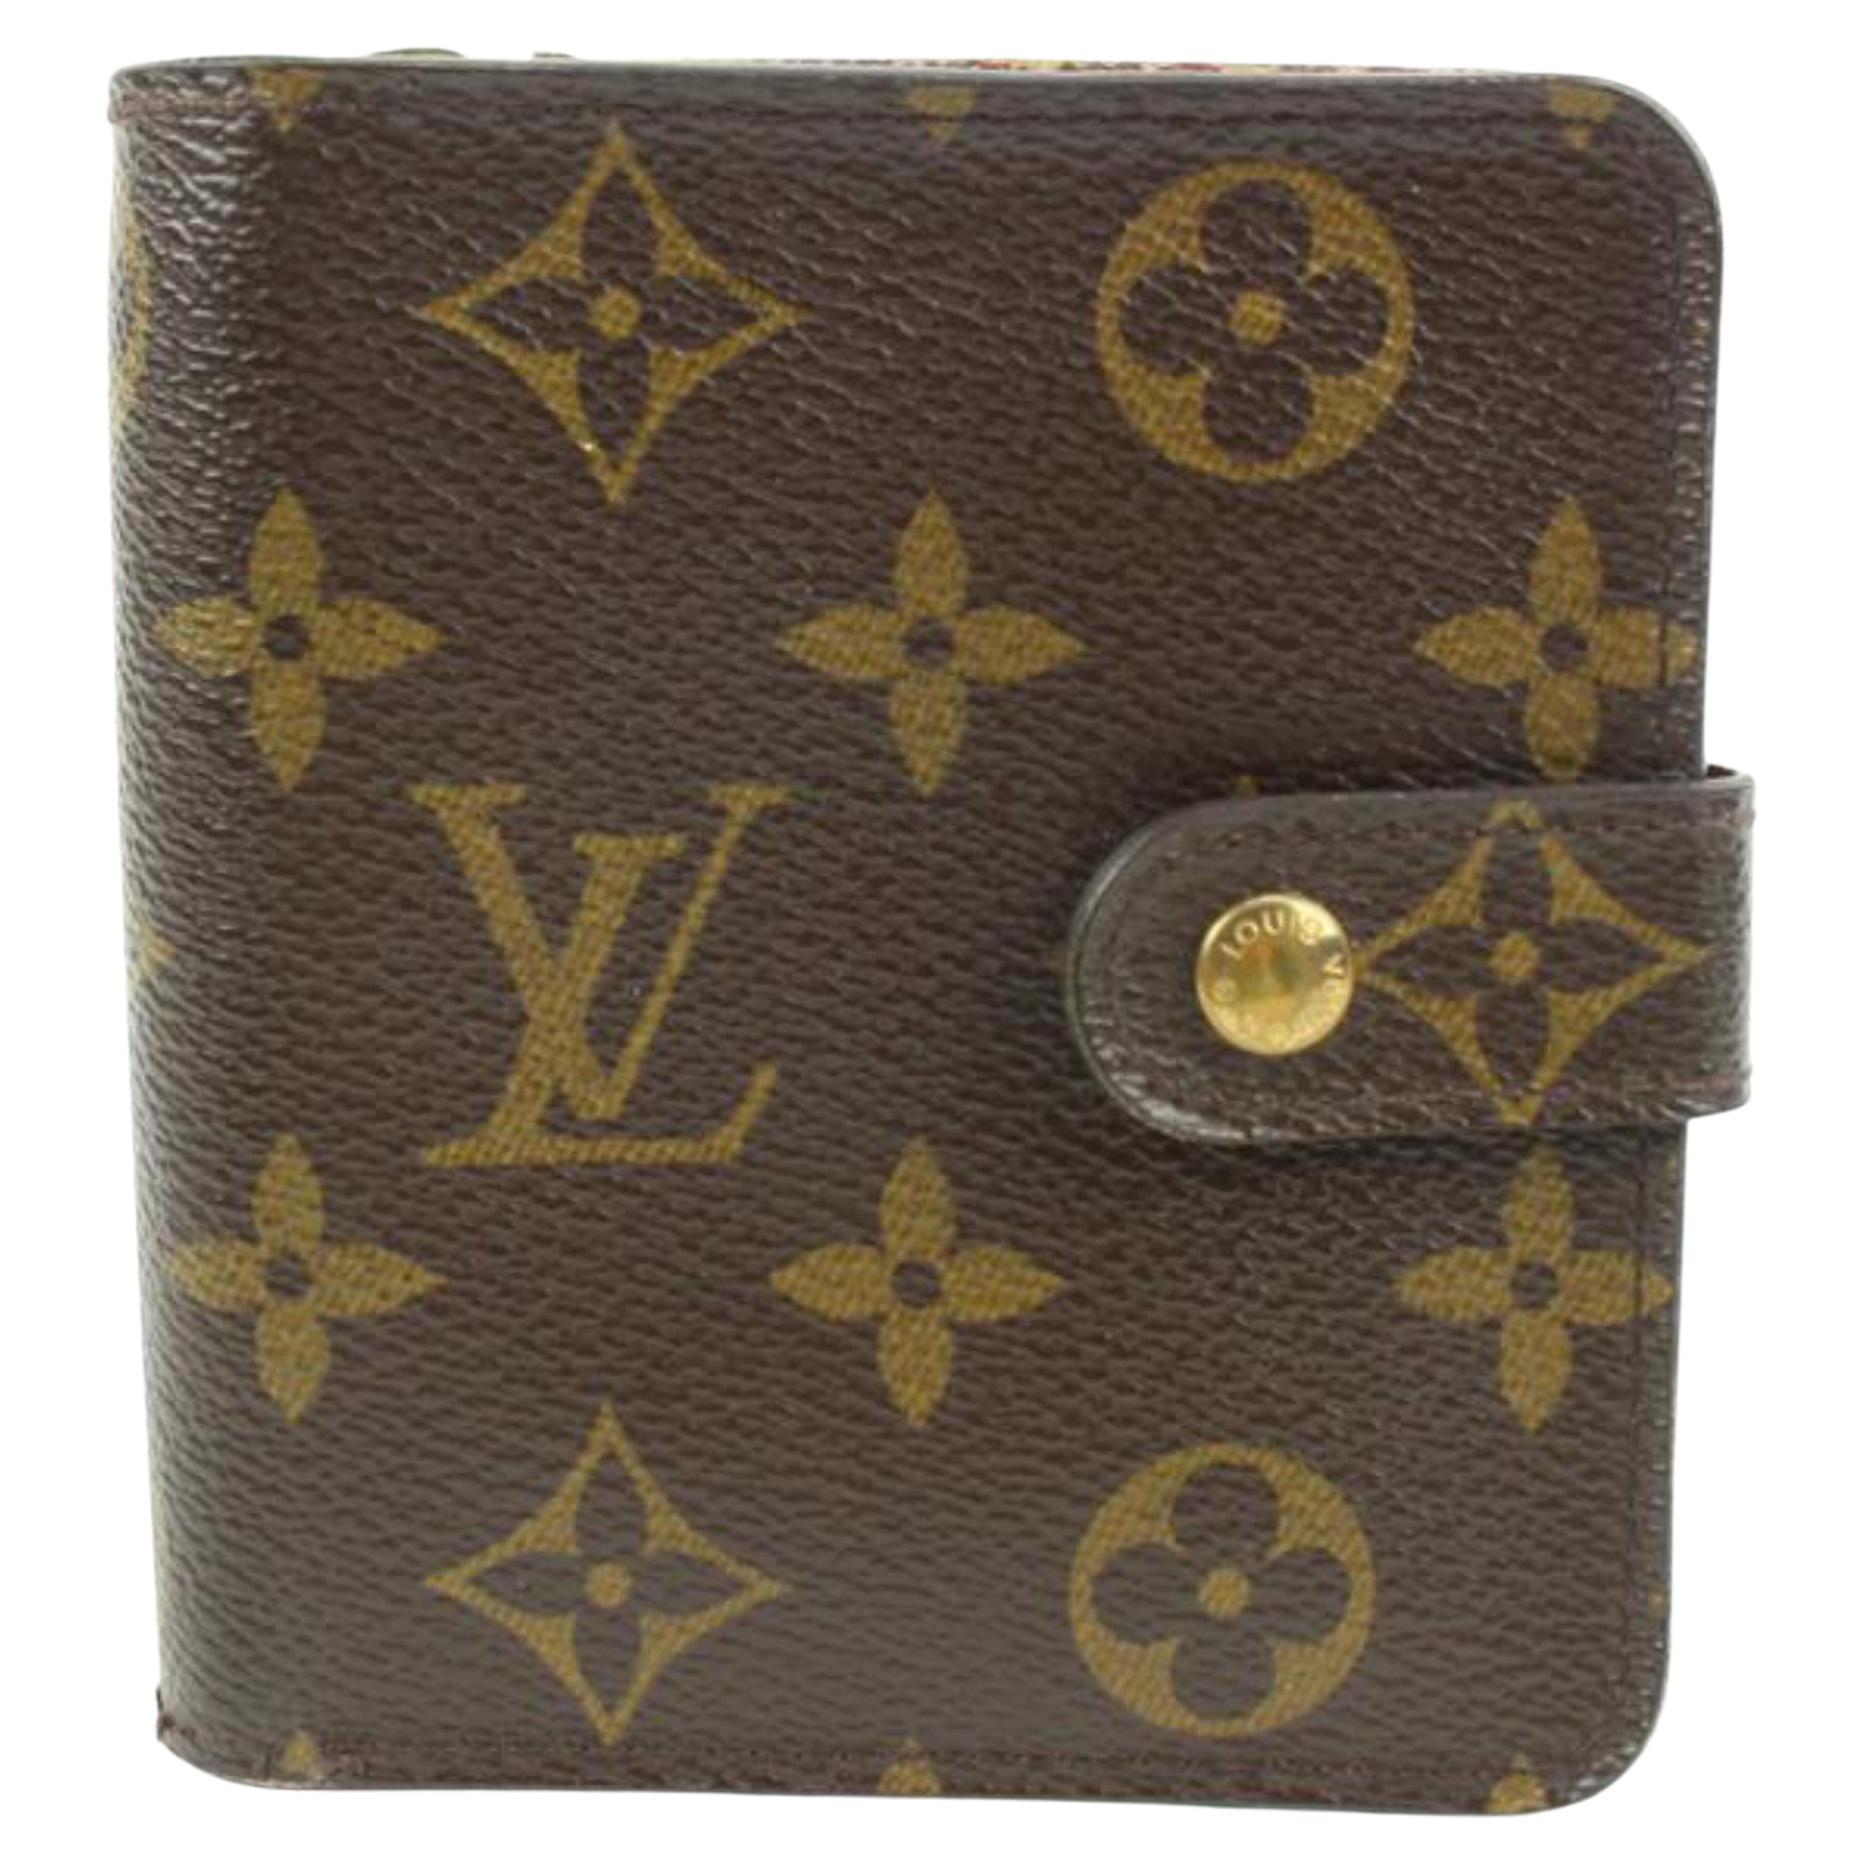 BEST LOUIS VUITTON WALLETS  SMALL COMPACT WALLETS  YouTube